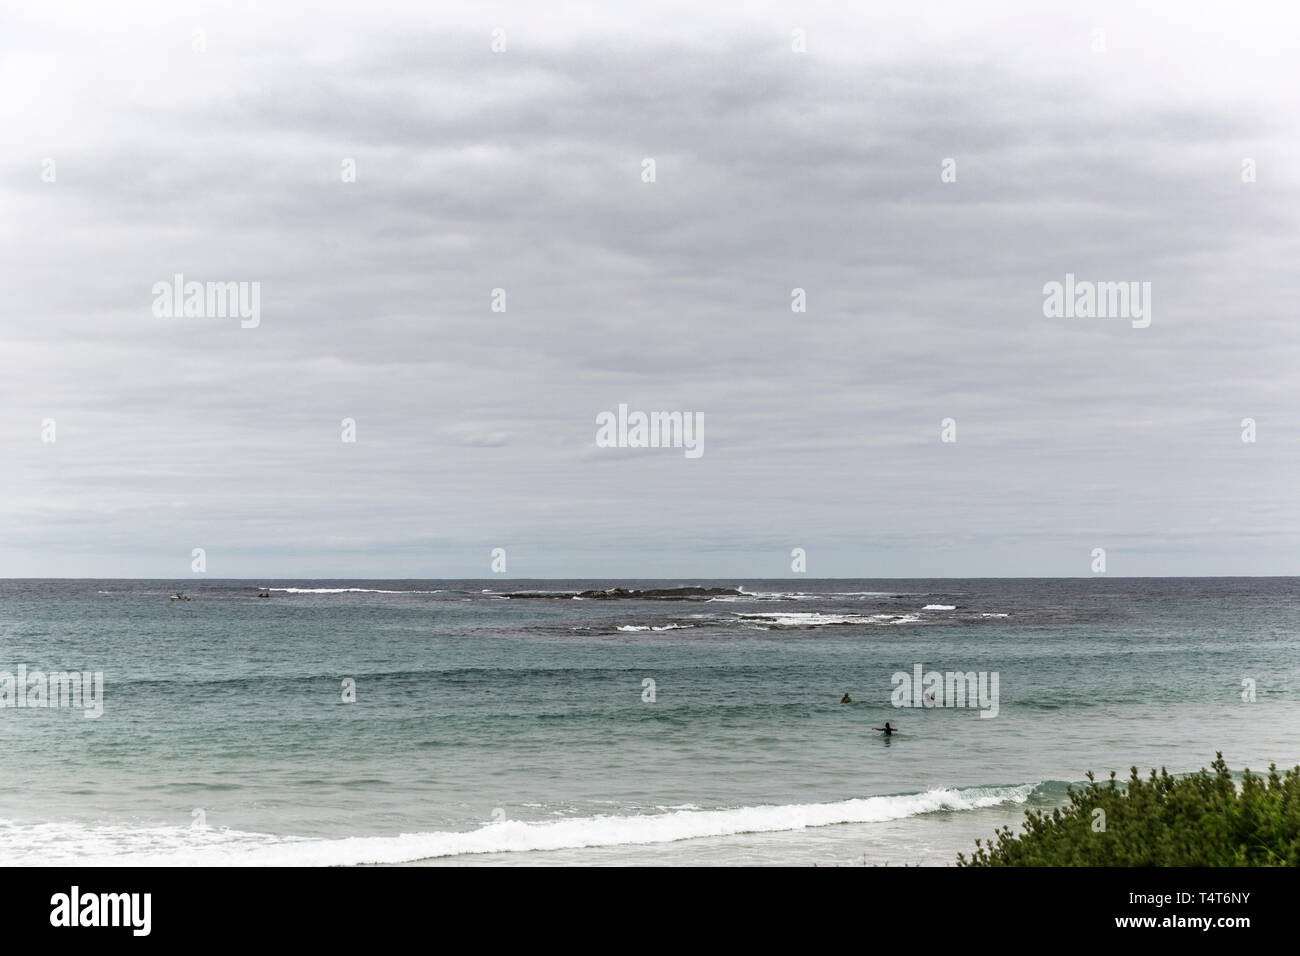 Brave surfers attempting to catch waves on overcast day. Stock Photo